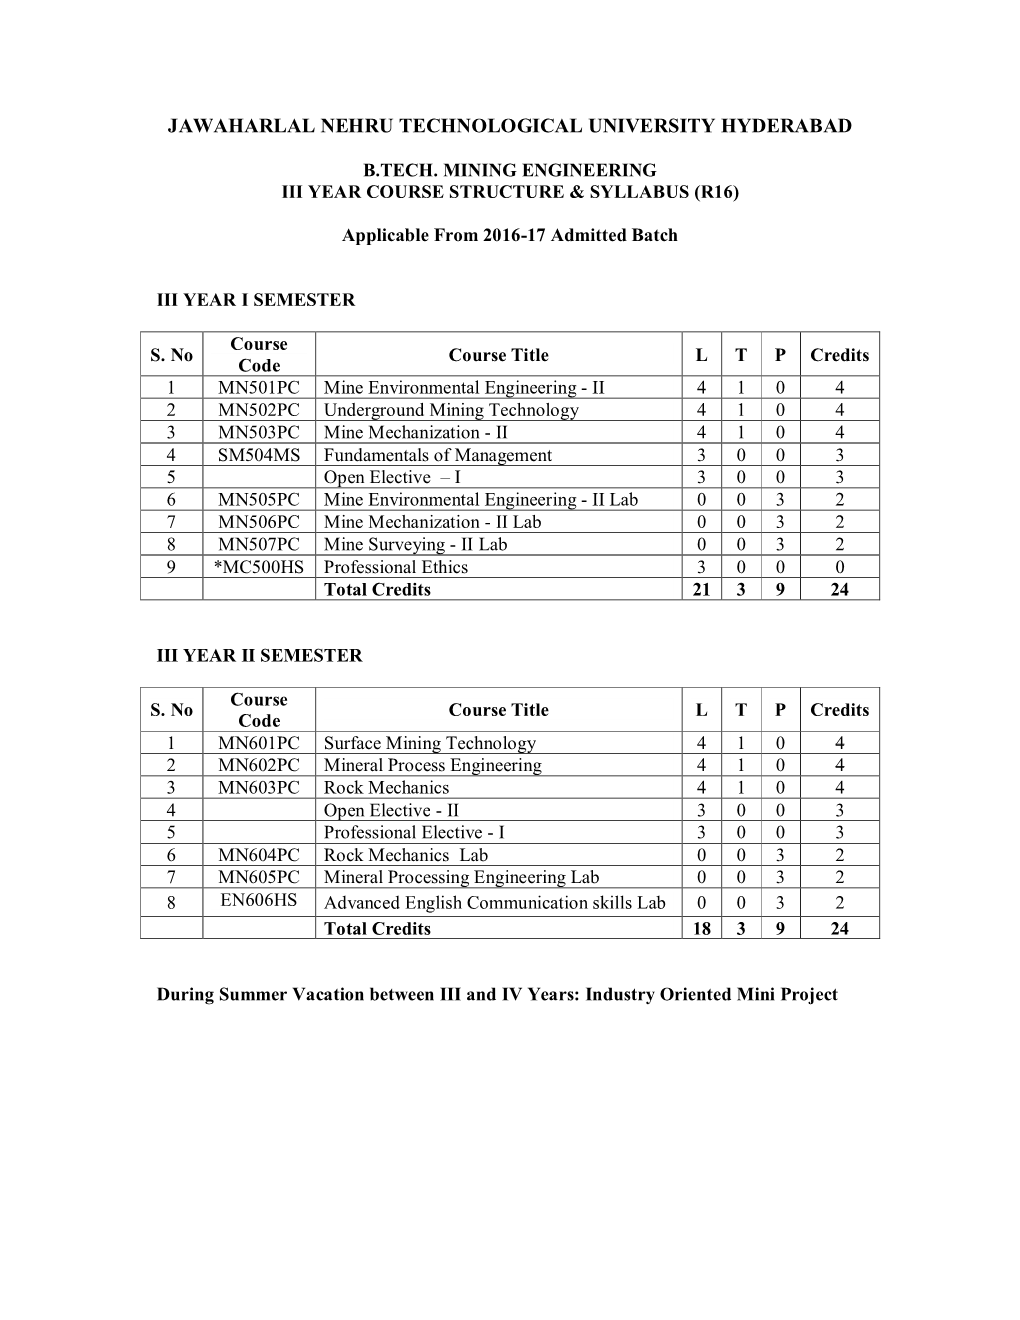 Iii Year Course Structure & Syllabus (R16)